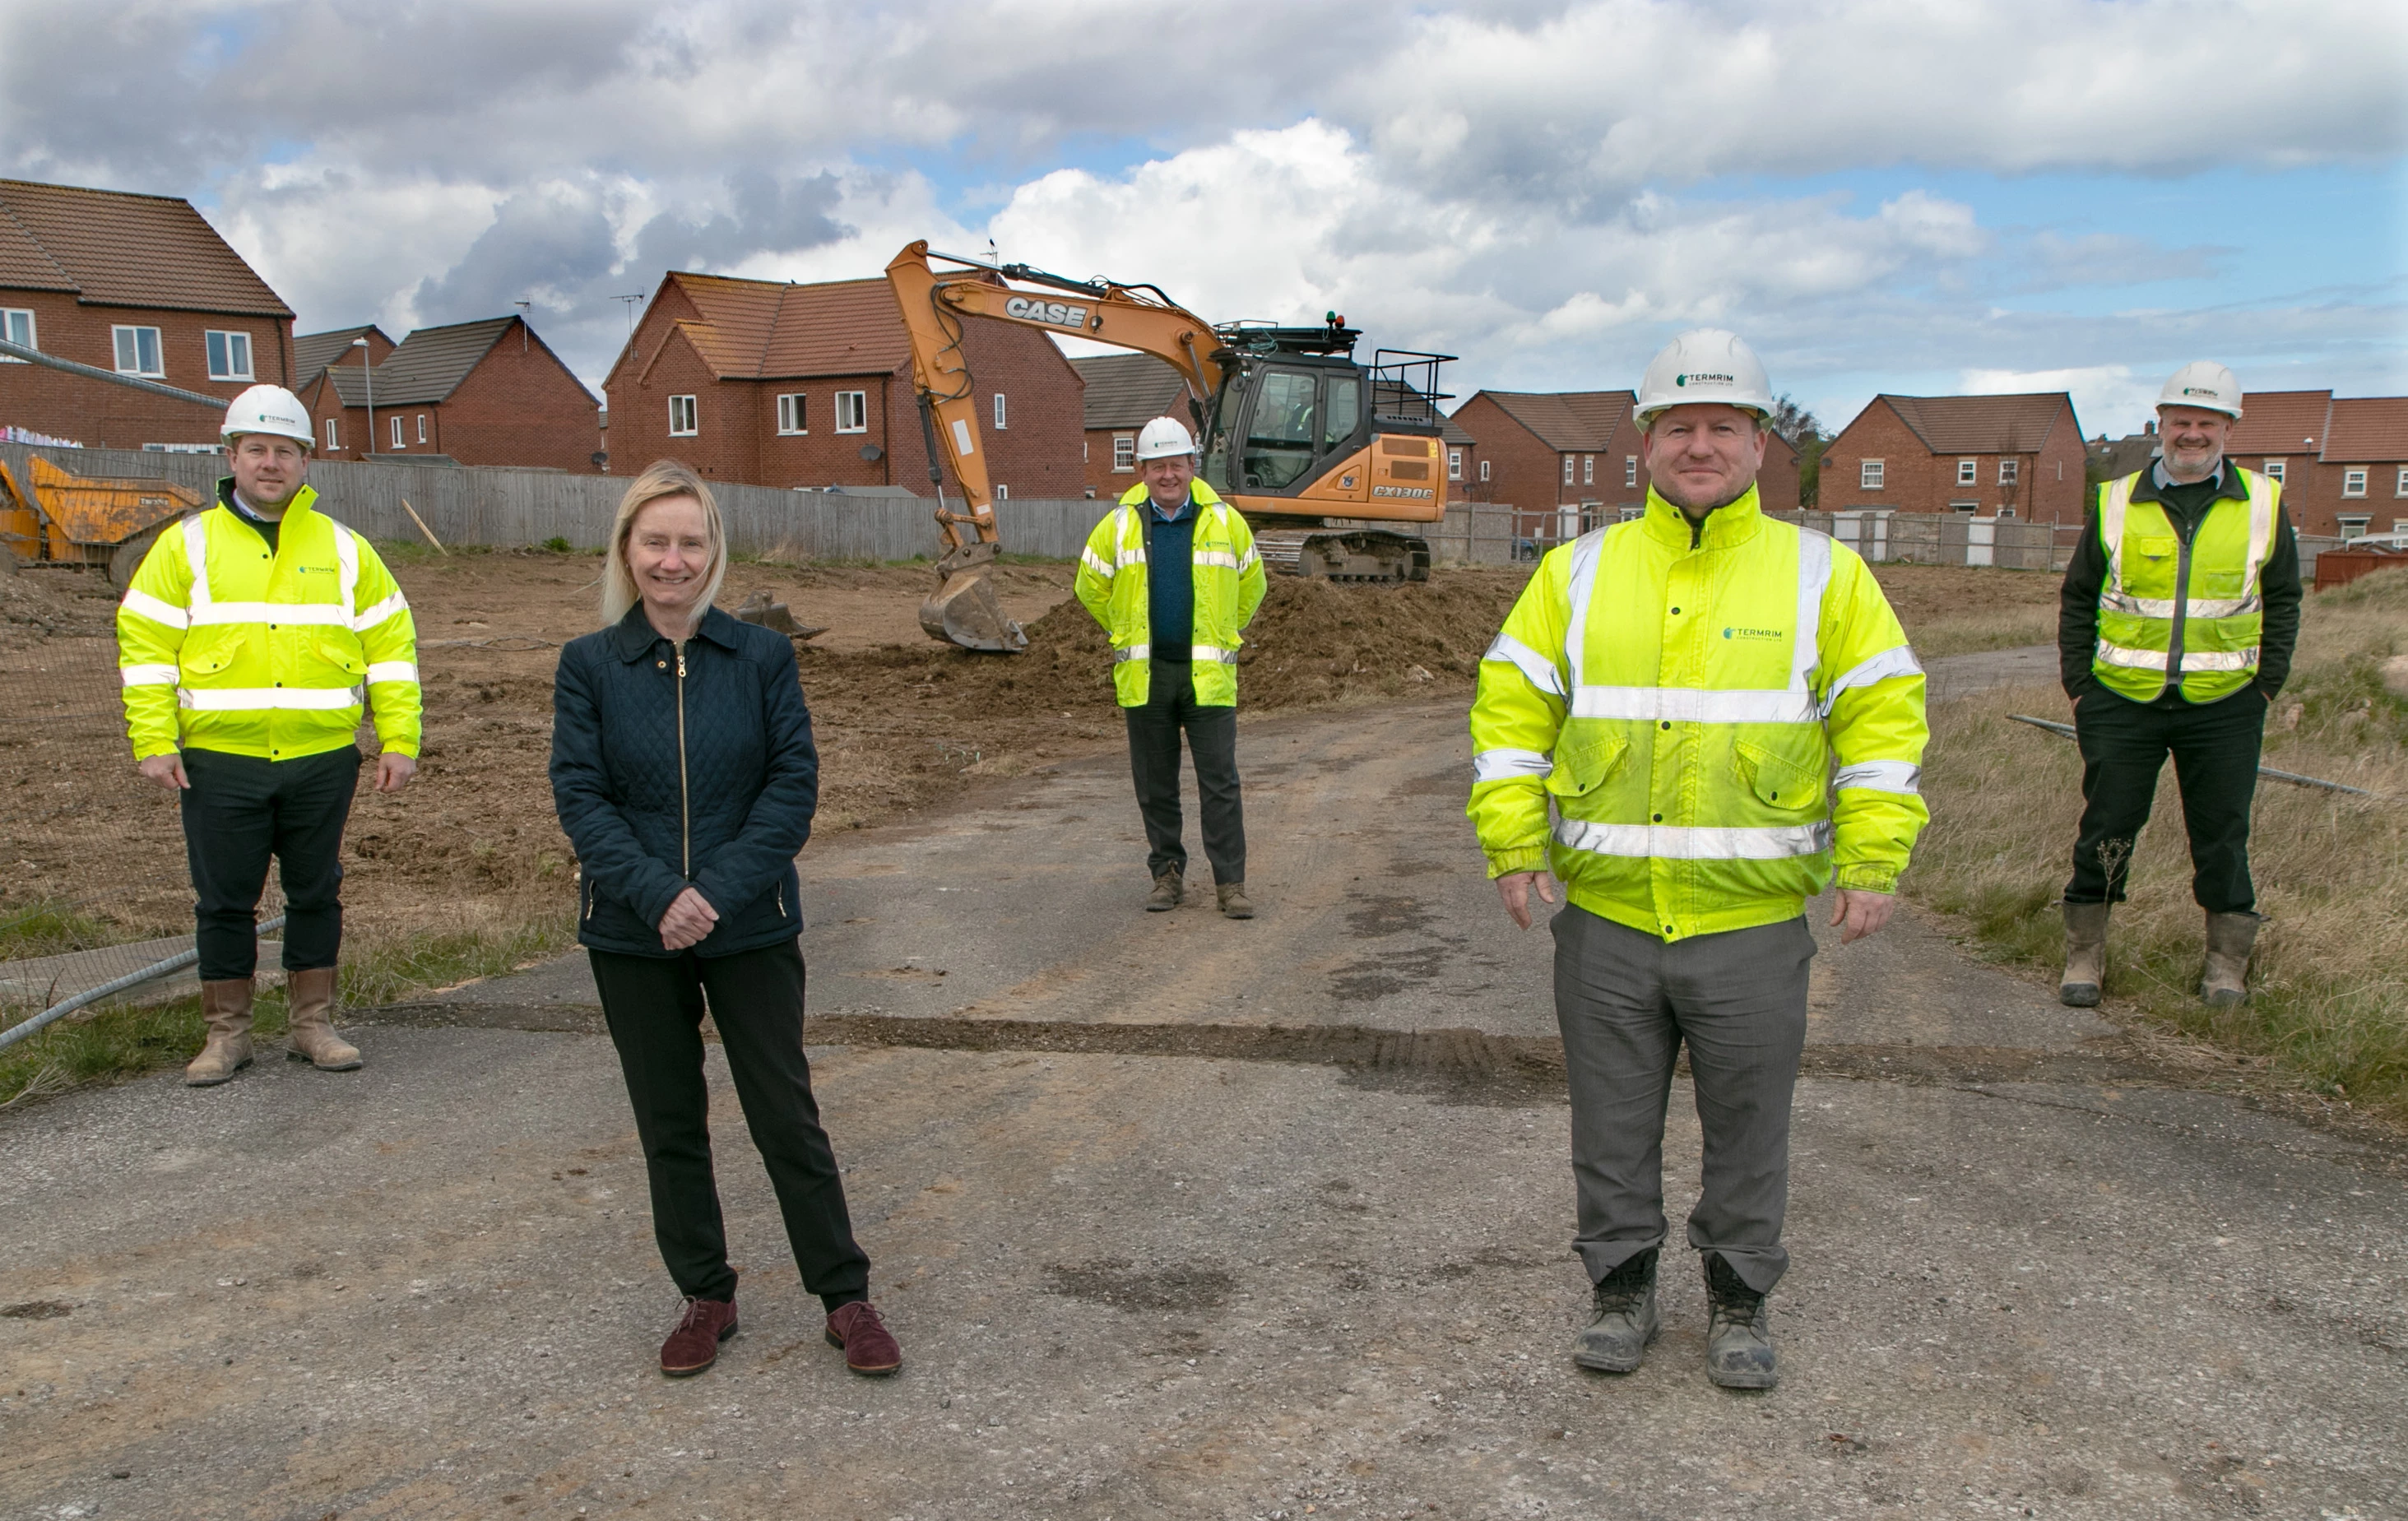 Work is now under way on Beyond Housing's £16m development of 113 new homes for sale at Mill Meadows, Filey.